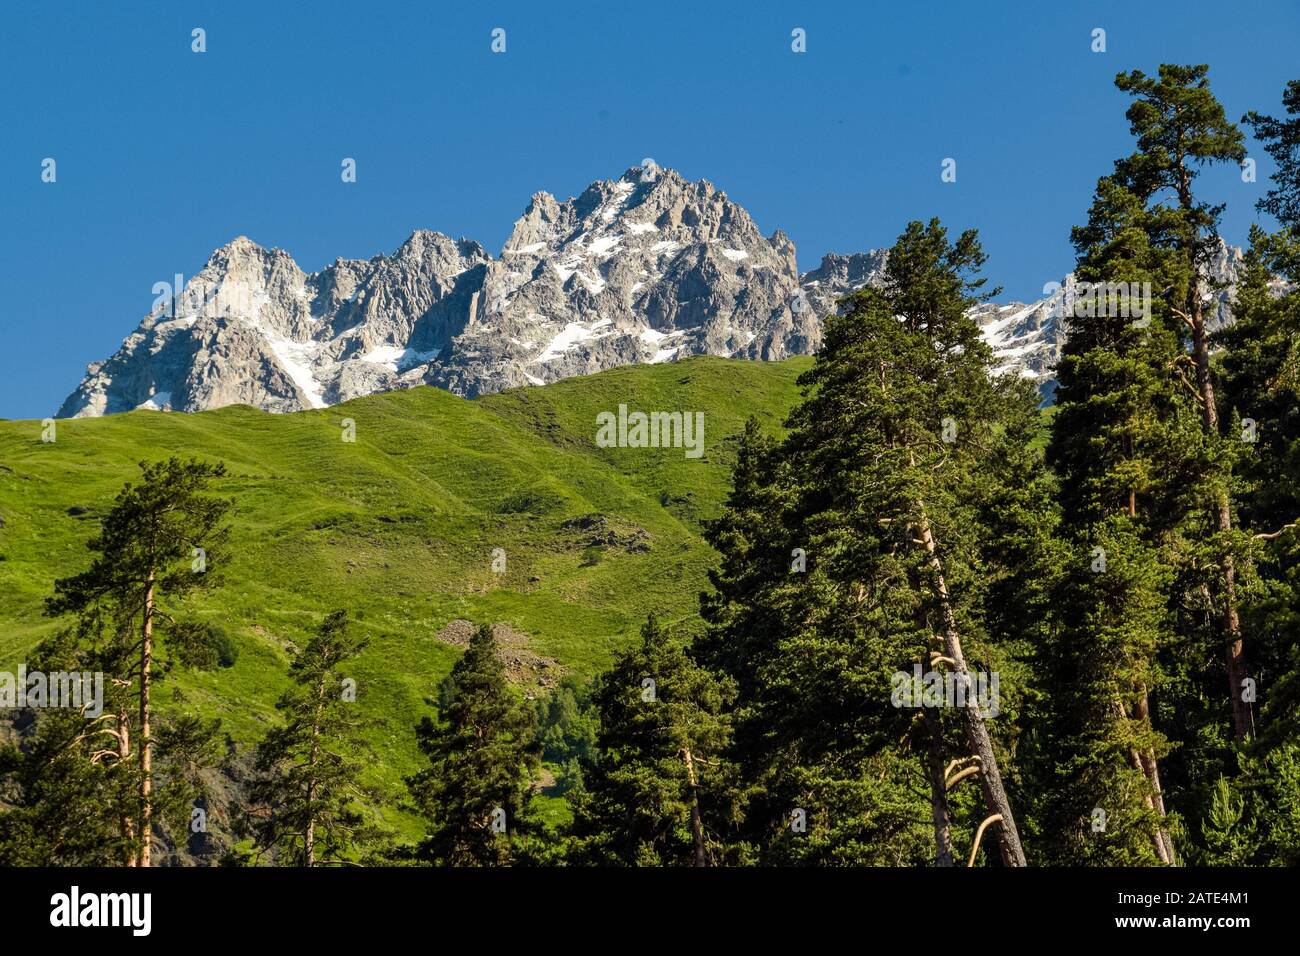 Rocky ridge of  Mount Ushba showing behind the pine trees and the grassy slopes of the lower altitudinal zones of Caucasus Mountains. Svaneti, Georgia. Stock Photo